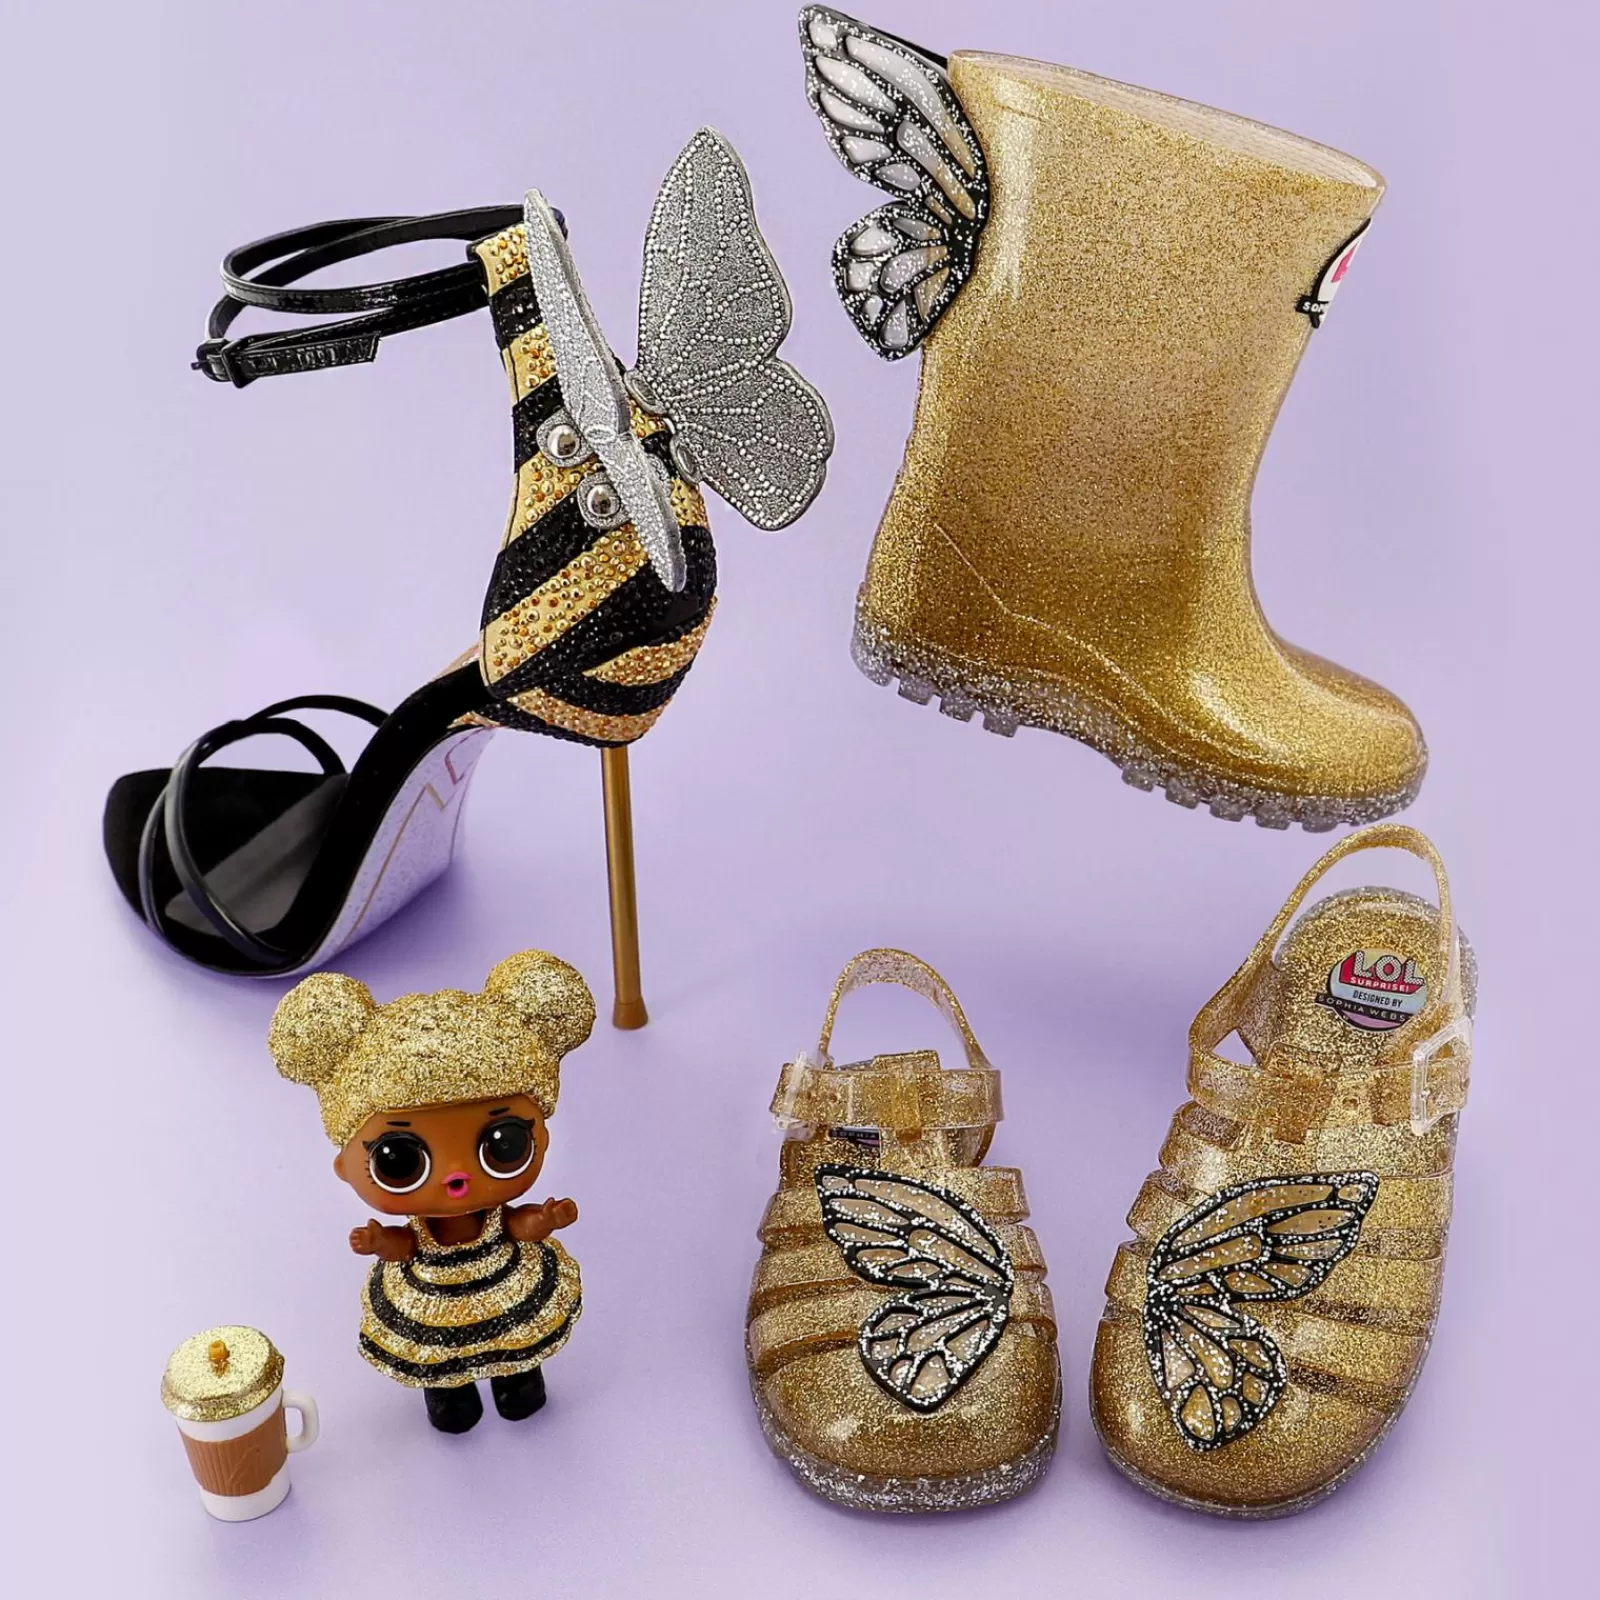 Sophia Webster Queen Bee Butterfly Jelly Sandal^ SW X LOL! SURPRISE COLLAB | MATCHING MUM & MINI